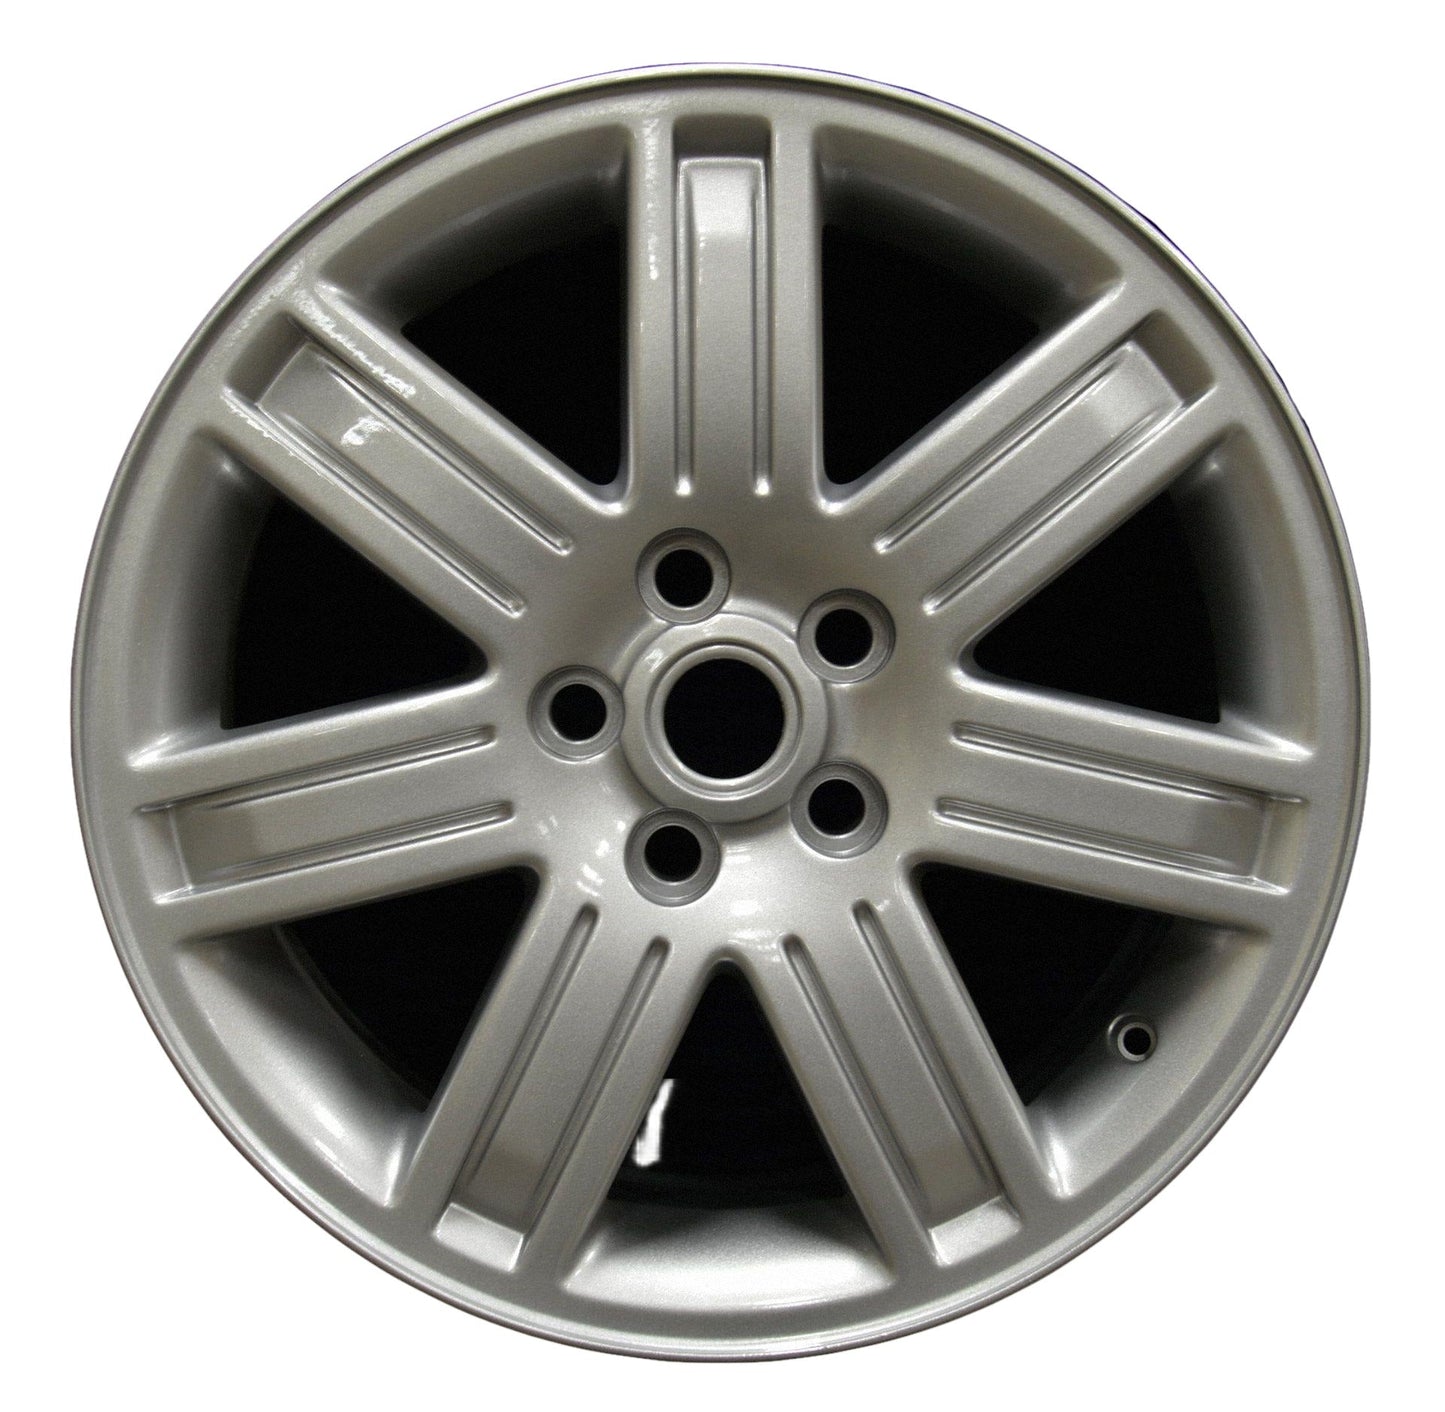 Land Rover Range Rover  2006, 2007, 2008, 2009 Factory OEM Car Wheel Size 19x8 Alloy WAO.72198.PS14.FF